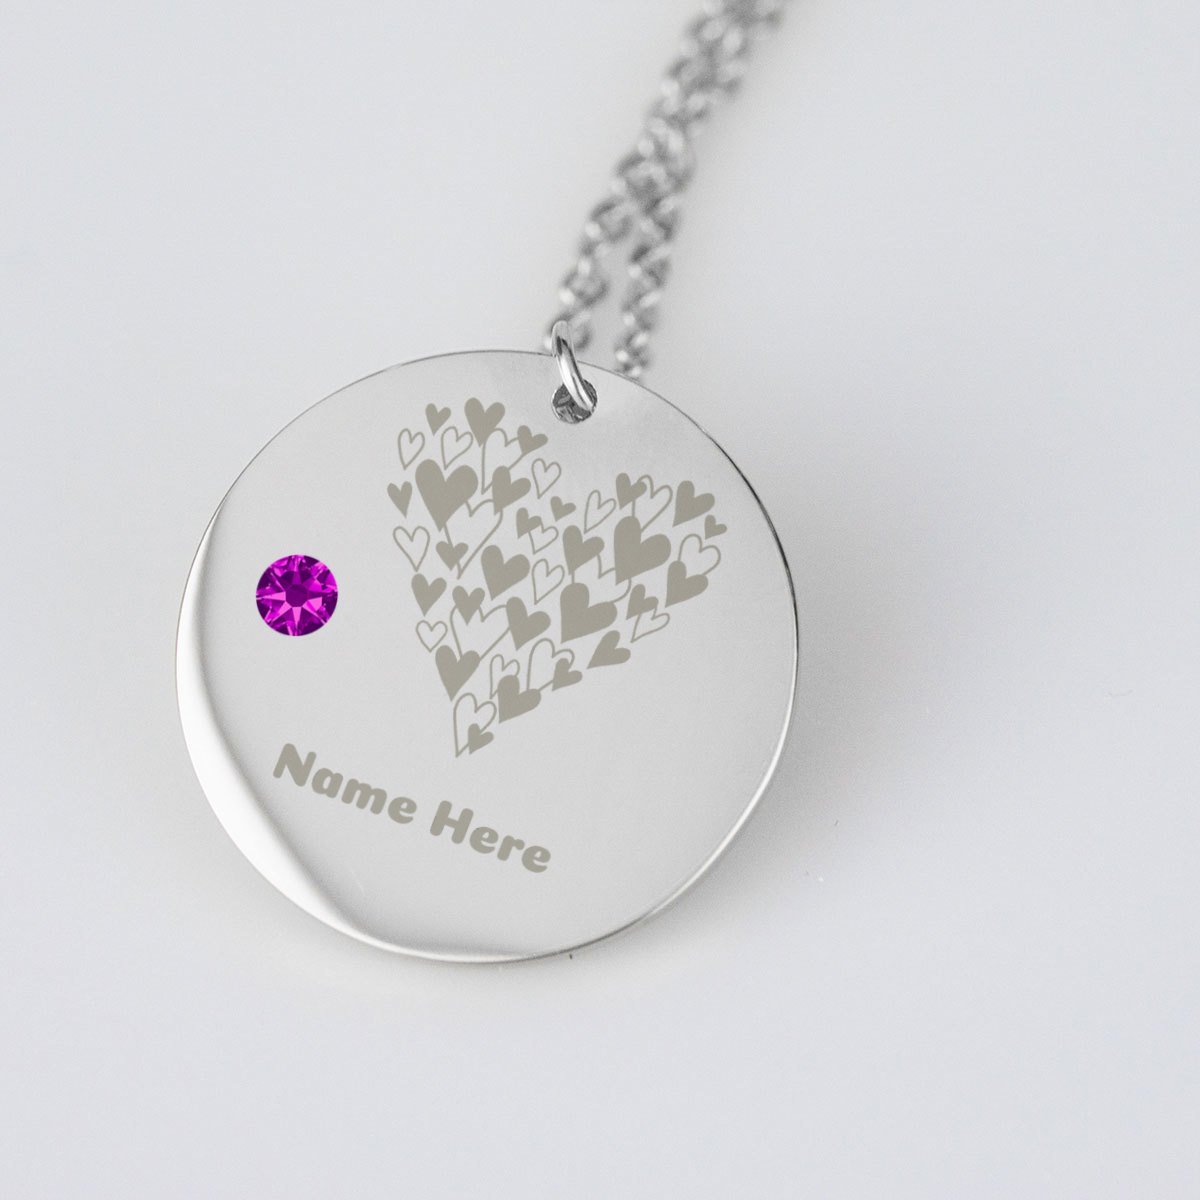 Personalized Crystal Birthstone Pendant Necklace - Omtheo Gifts